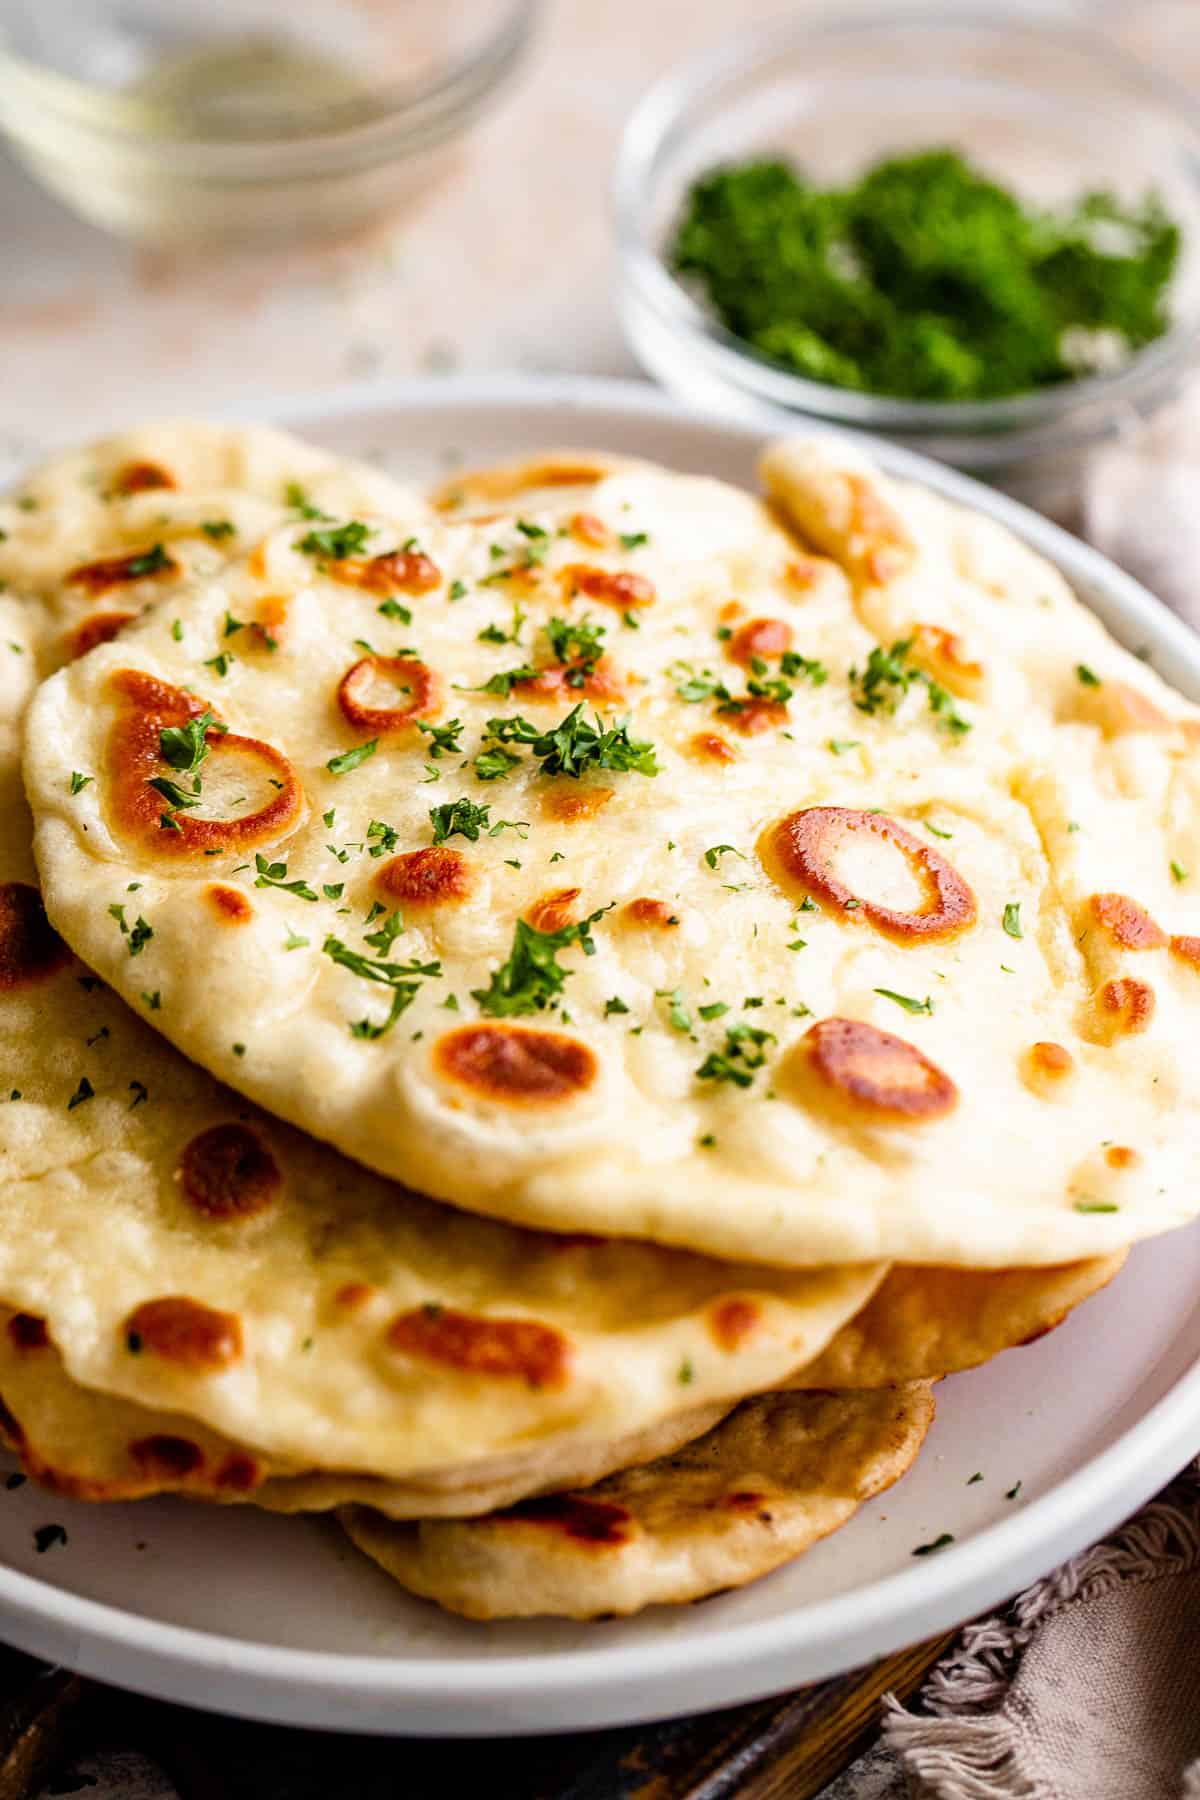 Stacked naan bread served on a plate.